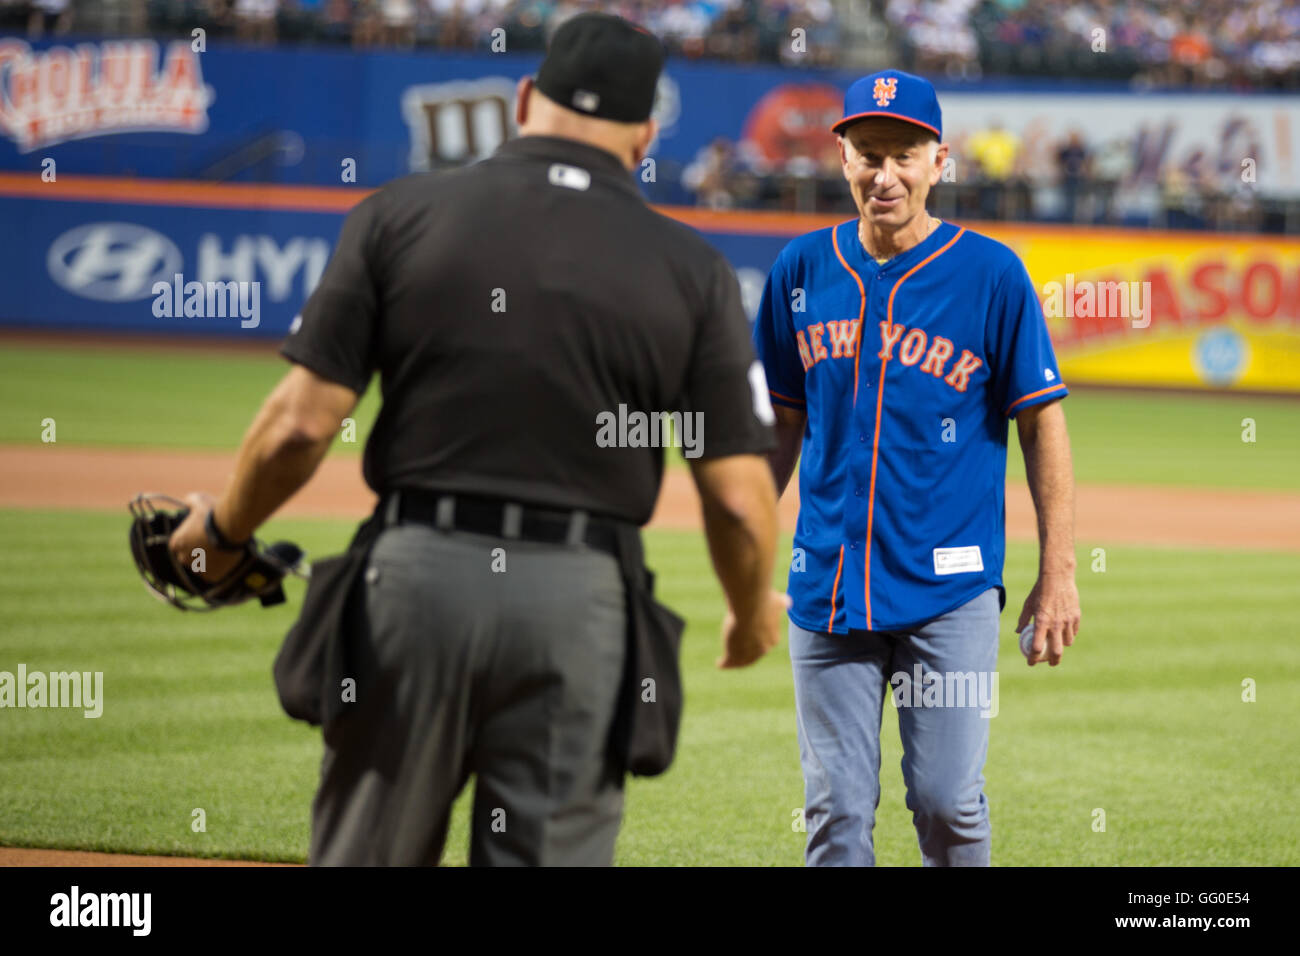 Nyc, United States. 01st Aug, 2016. John McEnroe throws the first pitch at the New York Mets vs New York Yankees baseball game at Citifield. Credit:  Louise Wateridge/Pacific Press/Alamy Live News Stock Photo